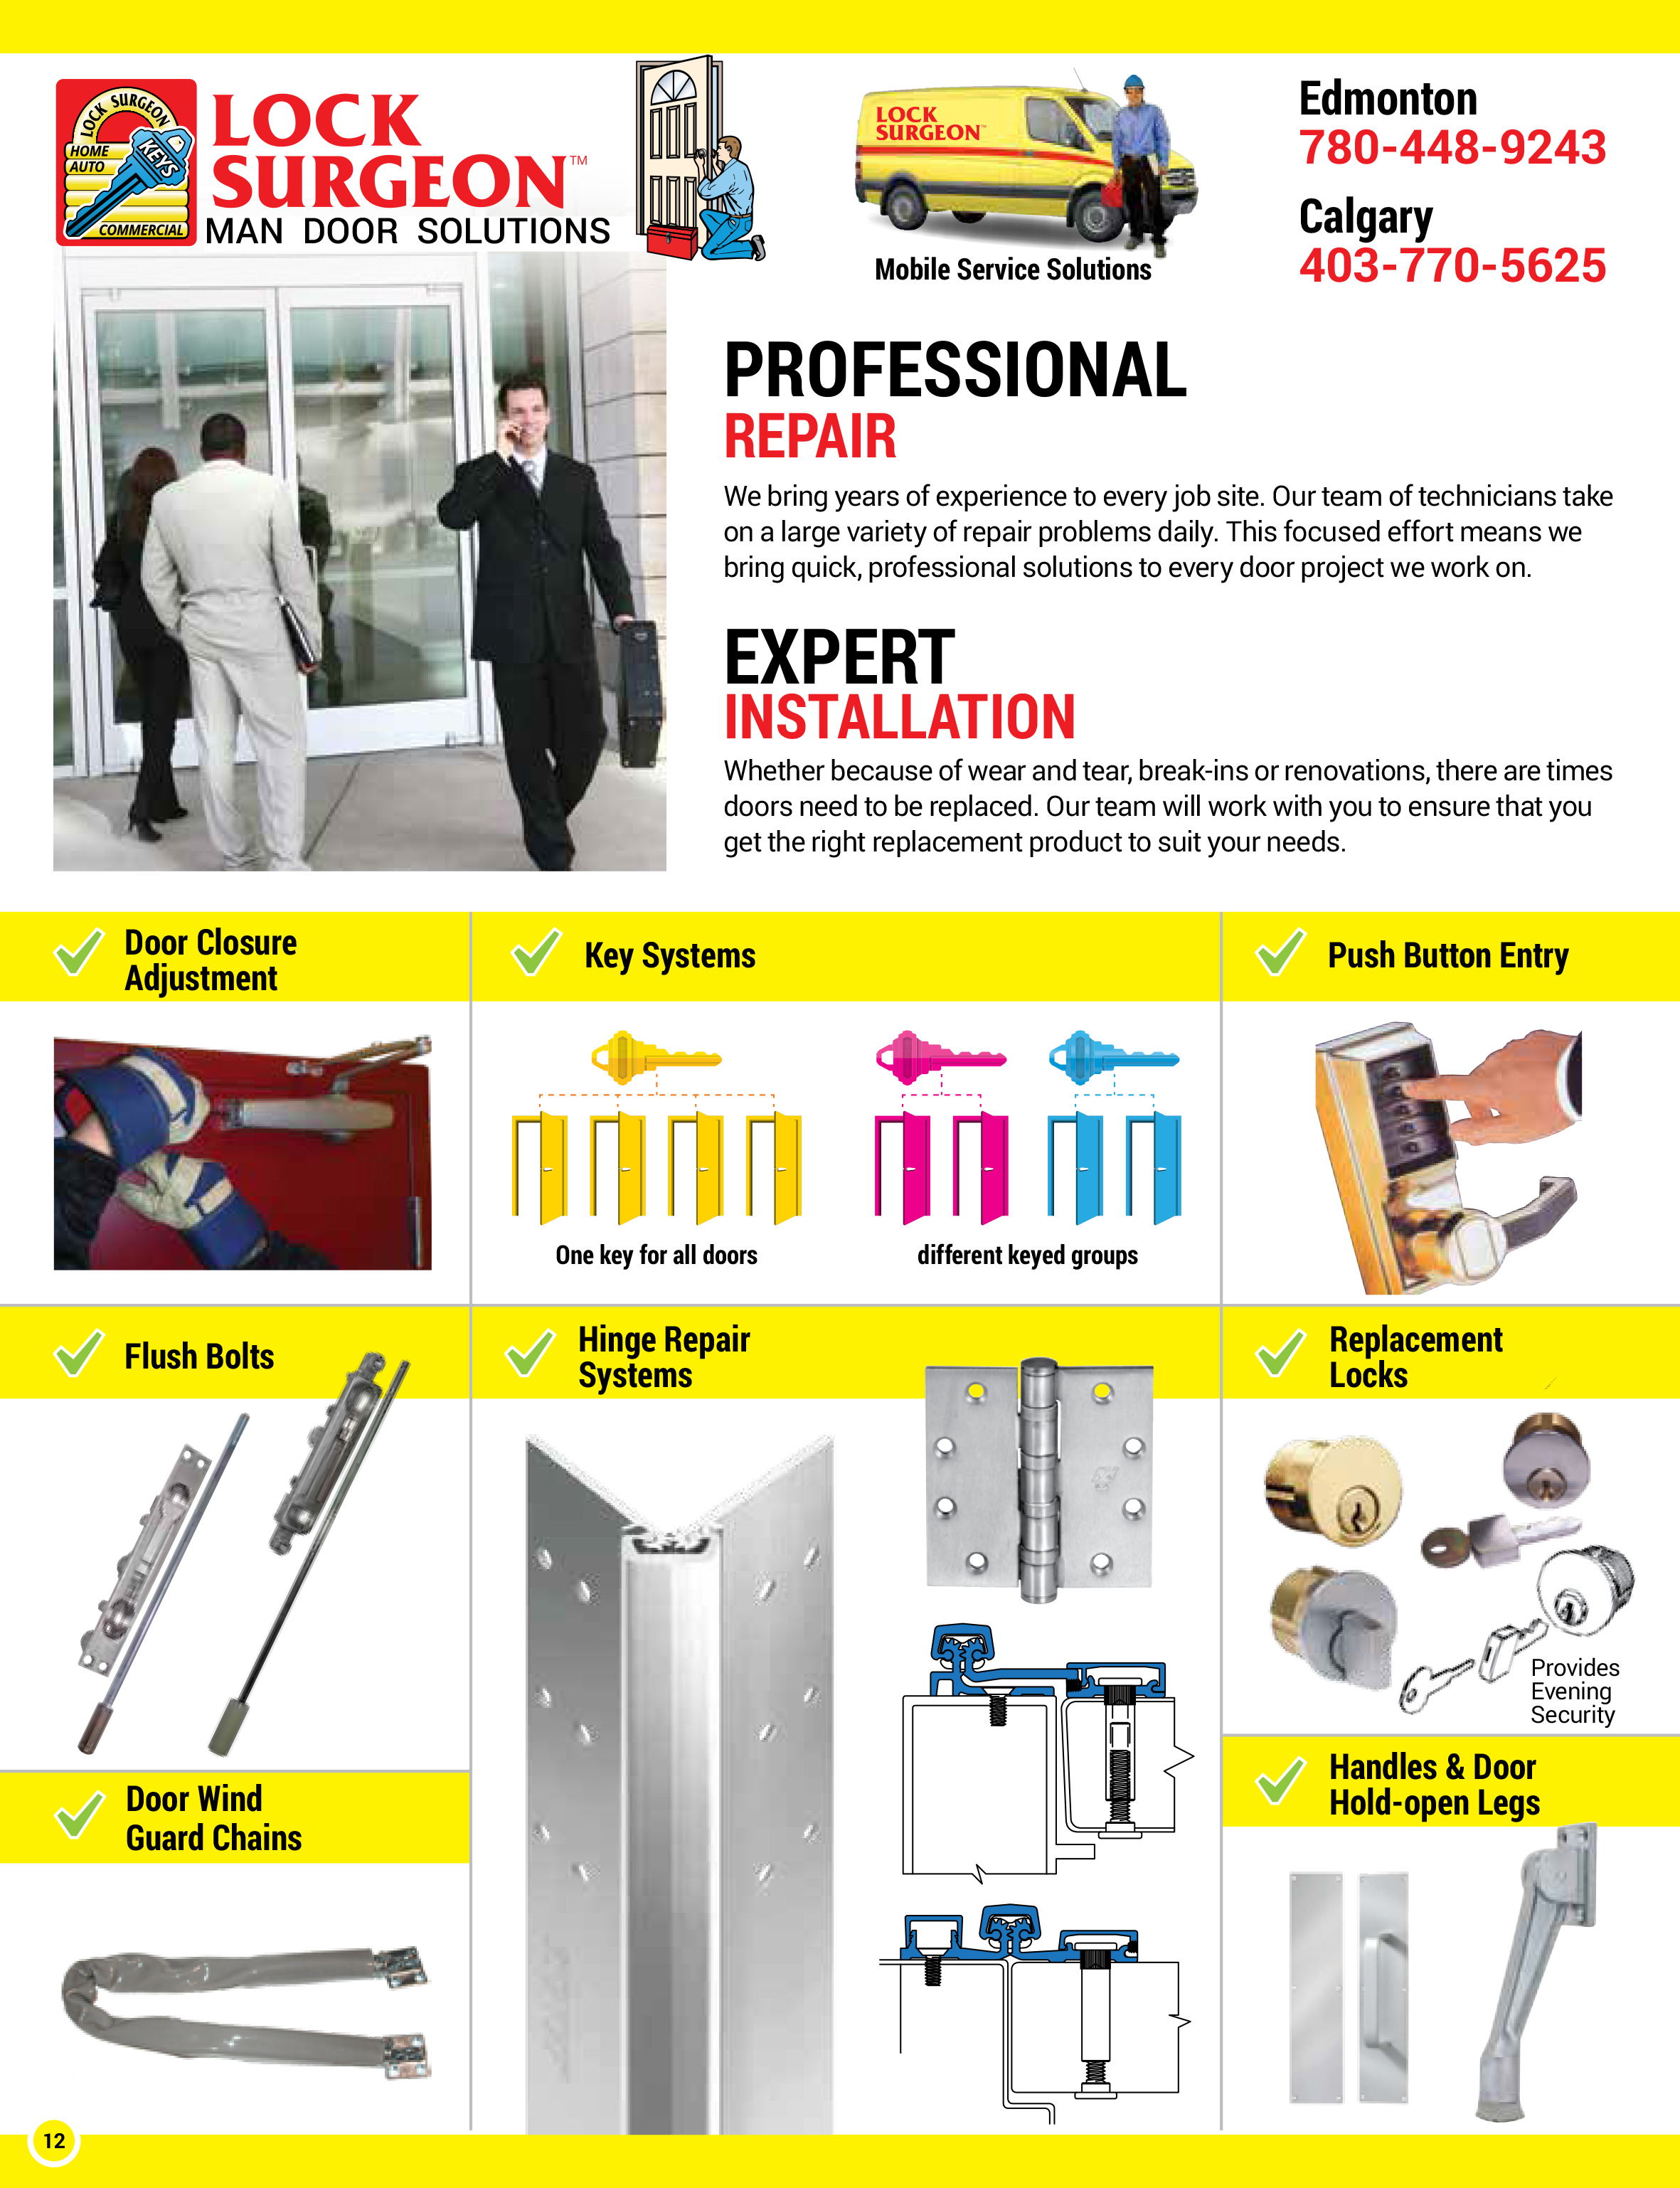 Door Surgeon brings years of experience to every job. Our team of door technicians take on the large variety of door repair problems. This focused effort means we bring fast mobile professional door solutions to your home or business. Door break-in repairs or door renovations our team will ensure that you get the correct door replacement products to meet your needs.